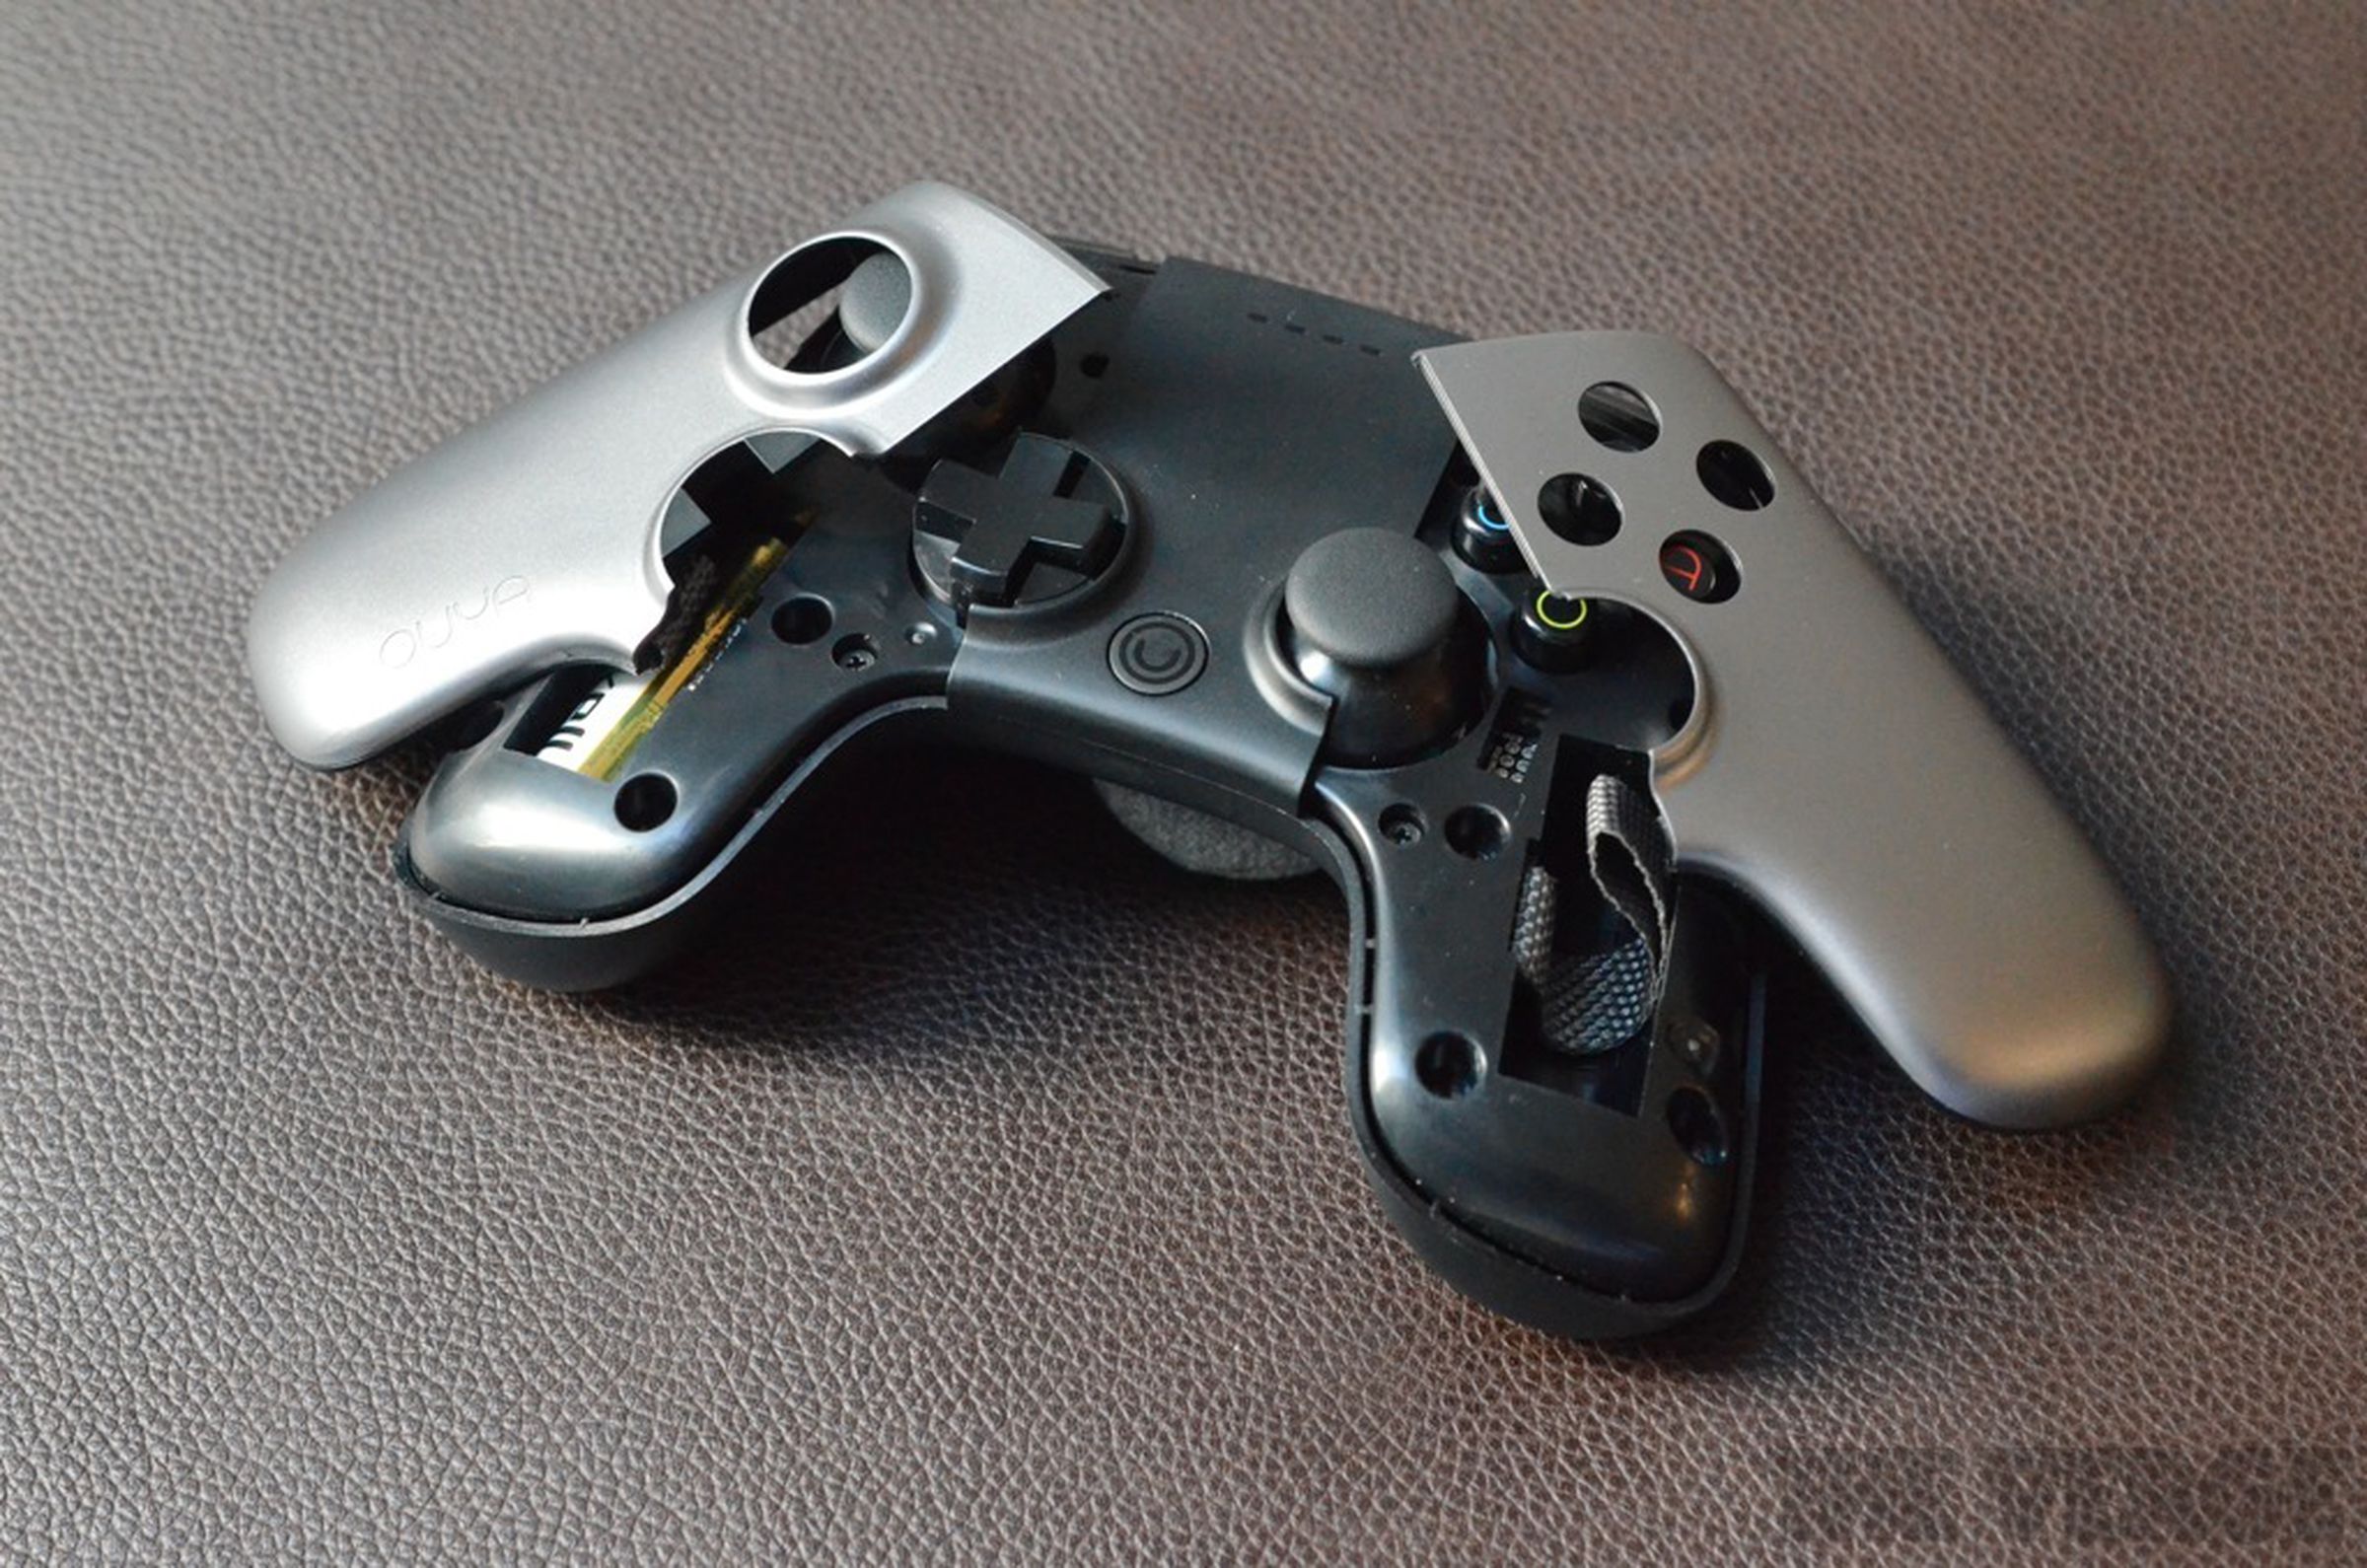 Ouya hands-on pictures